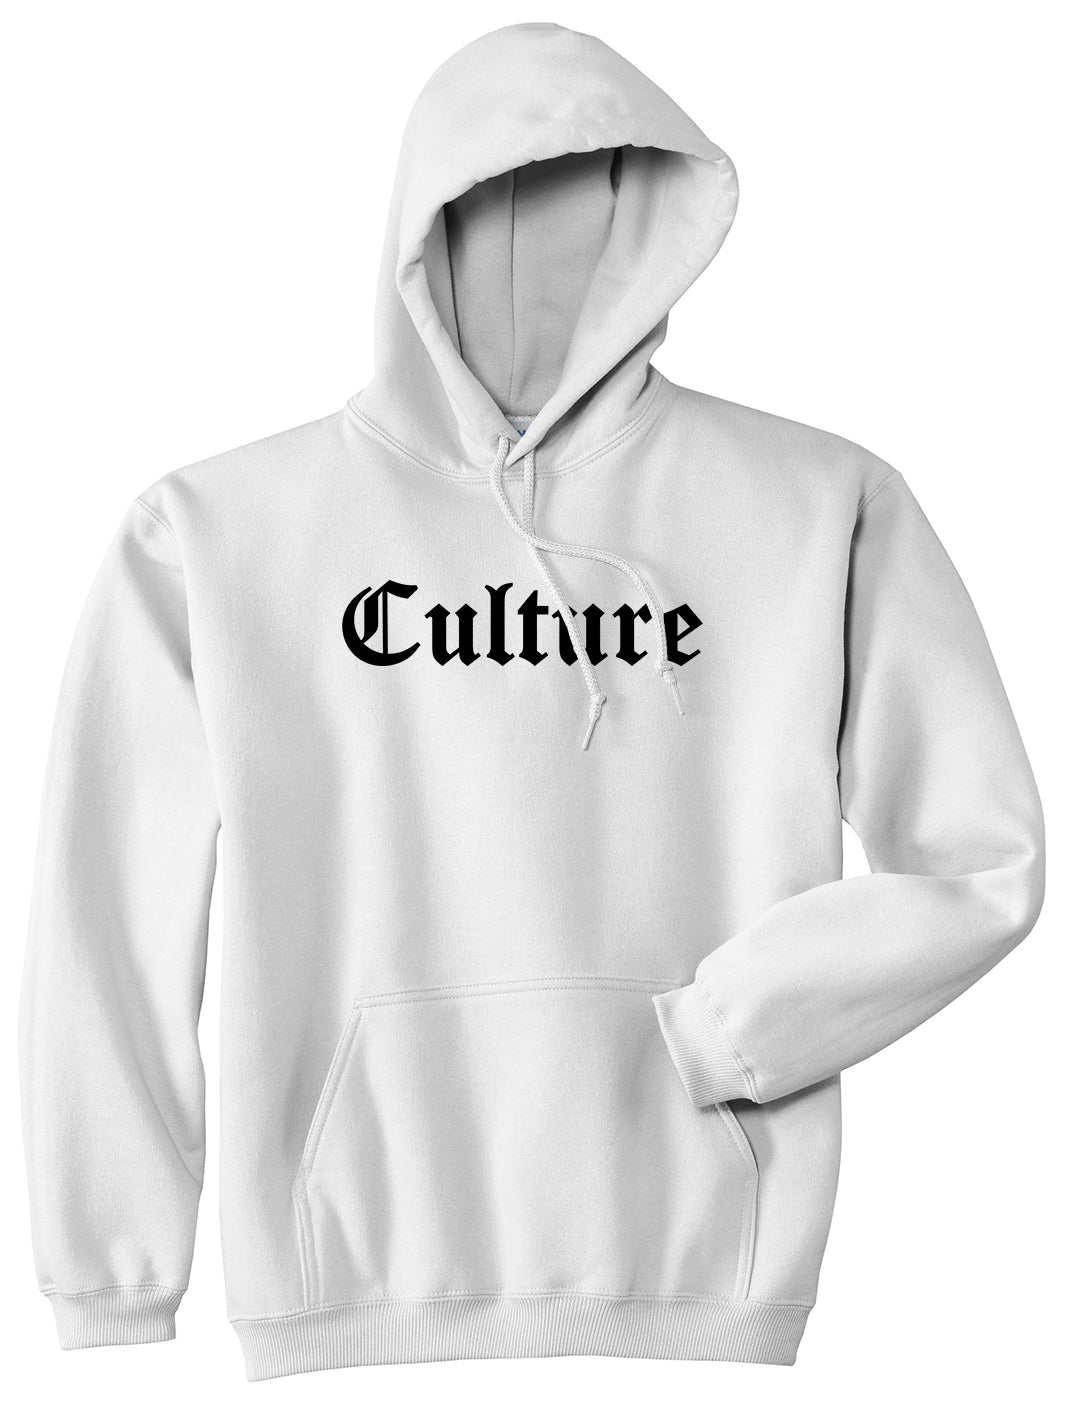 Culture Gothic Font White Pullover Hoodie by Kings Of NY